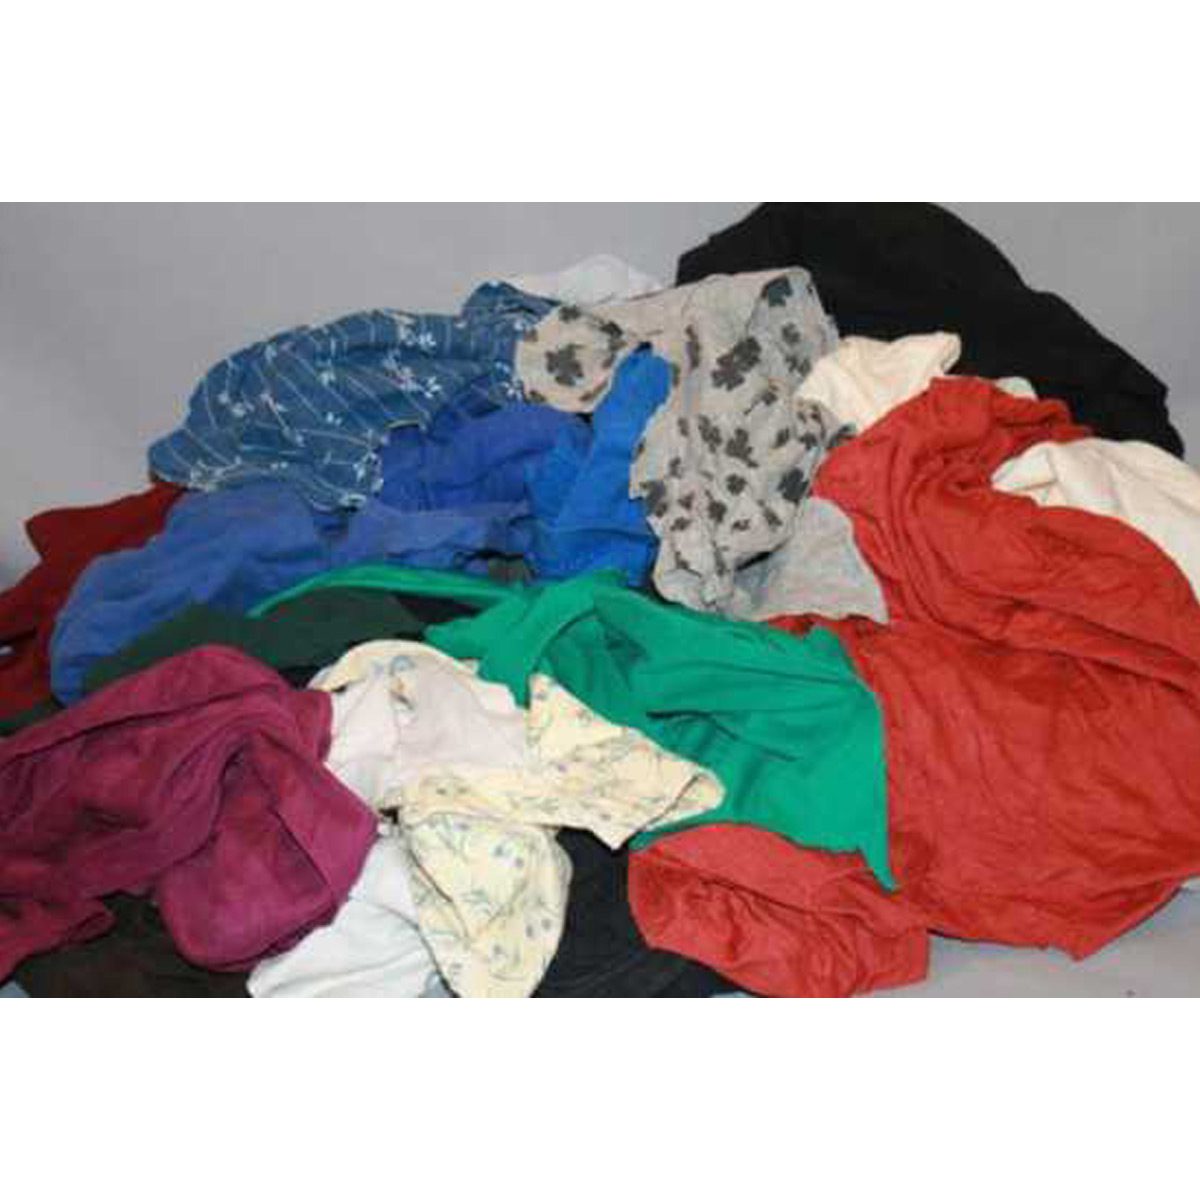 cleaning-equipment-cloths-scourers-wipes-coloured-tshirt-140kg-wool-bale-mixed-cotton-rag-vjs-distributors-RAGCOL